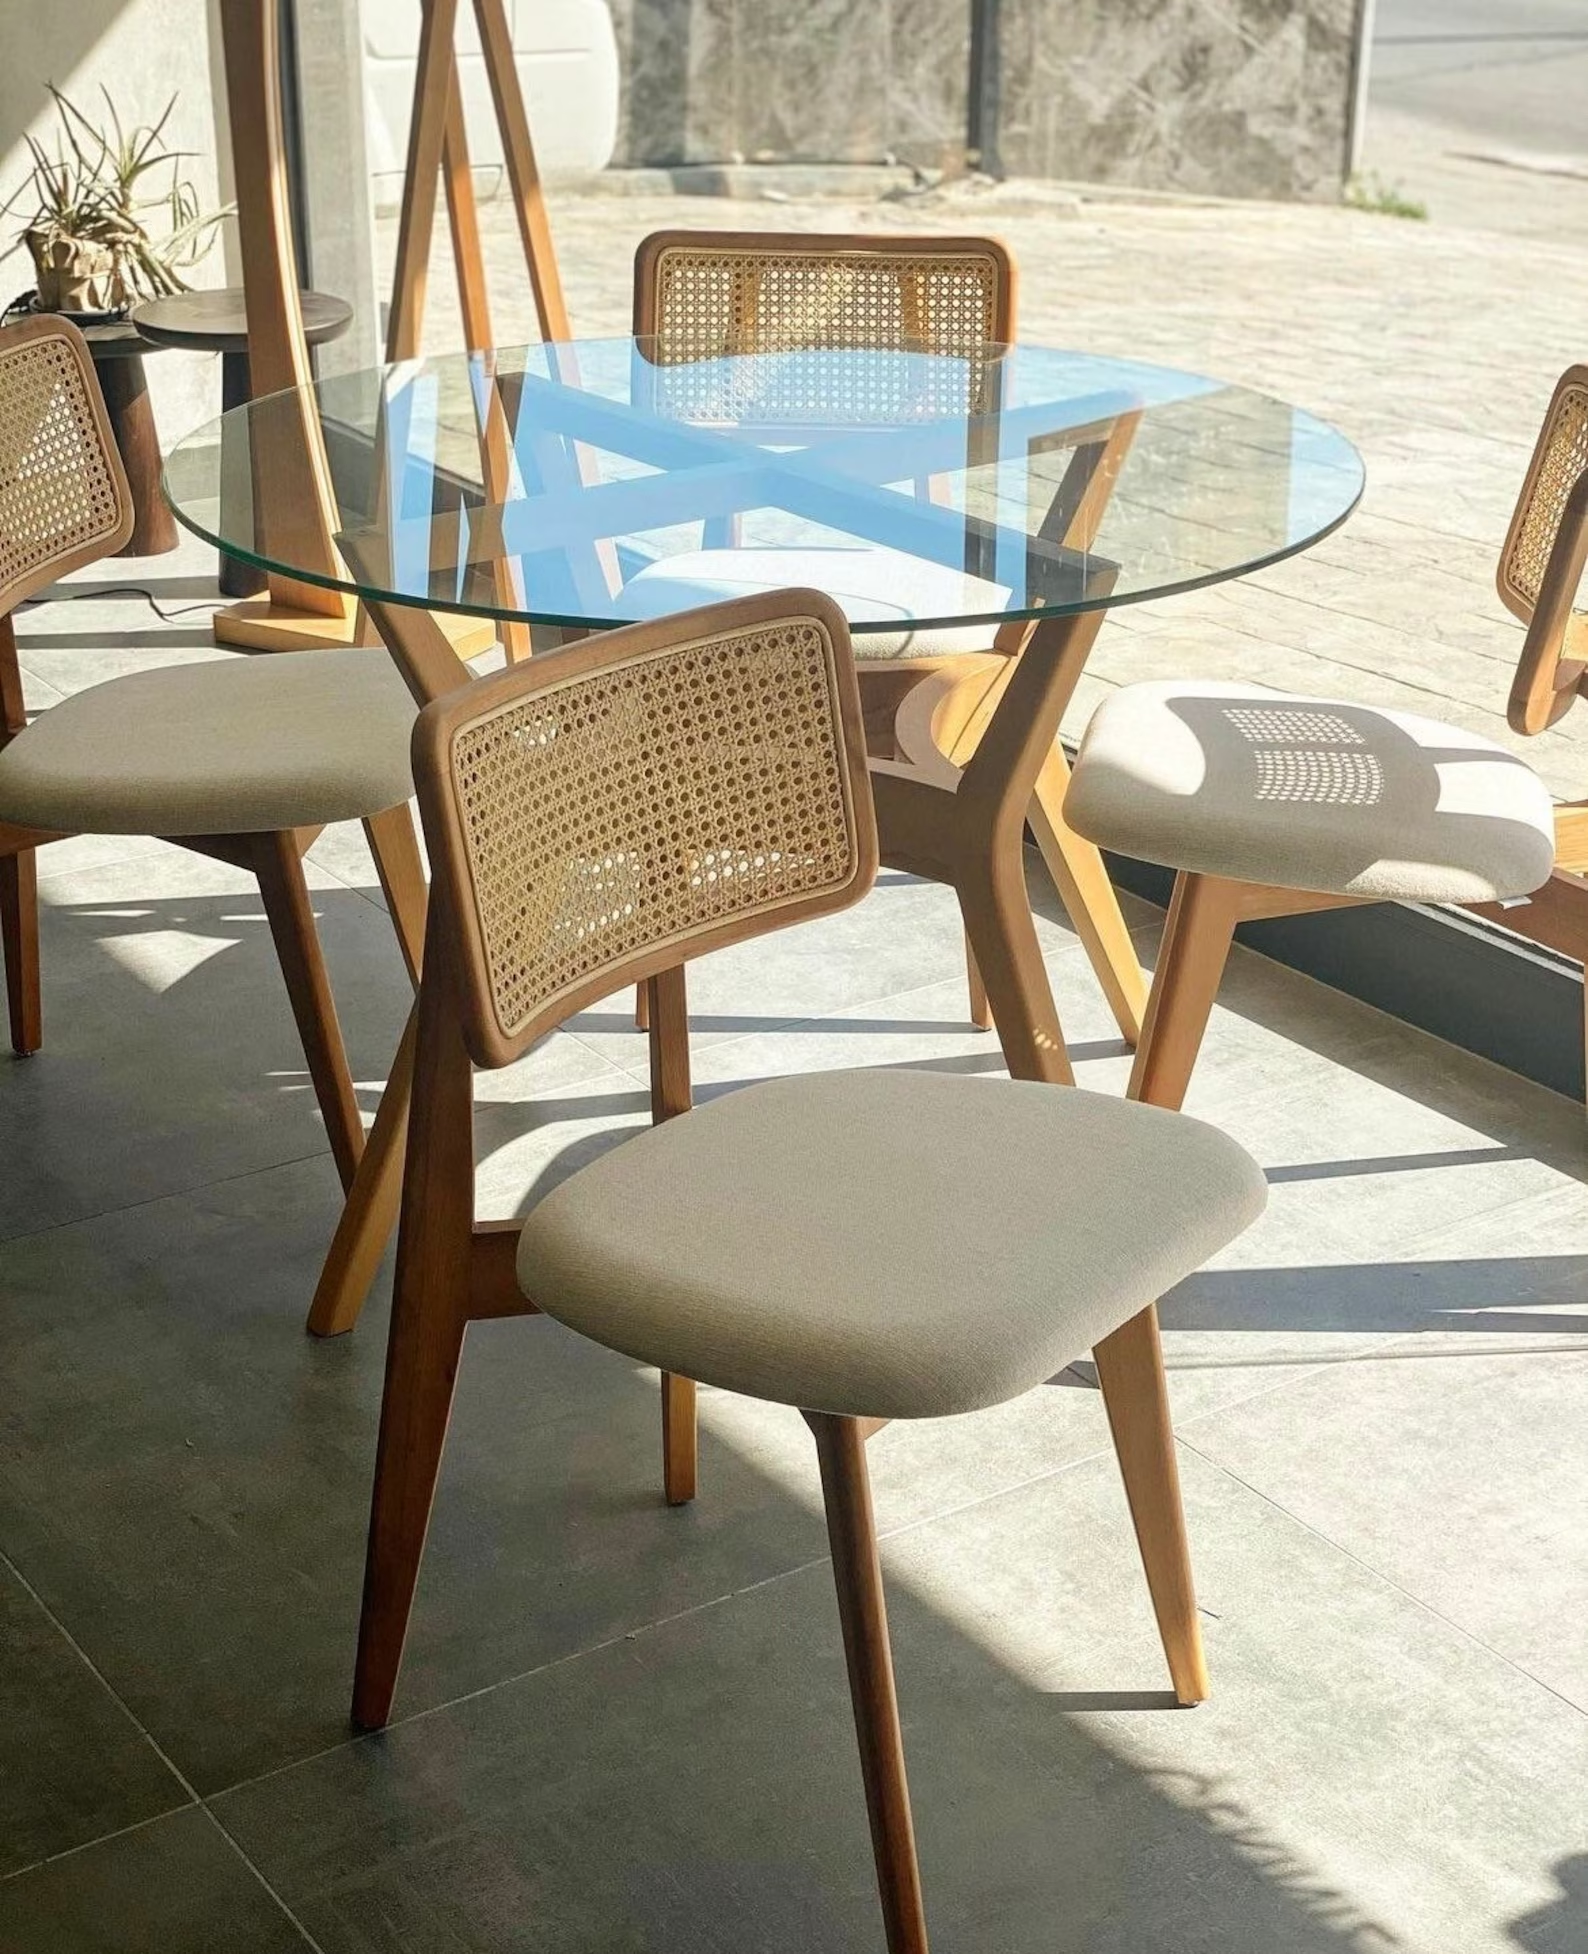 Rattan Chairs : Stylish and durable rattan chairs ideal for any outdoor space